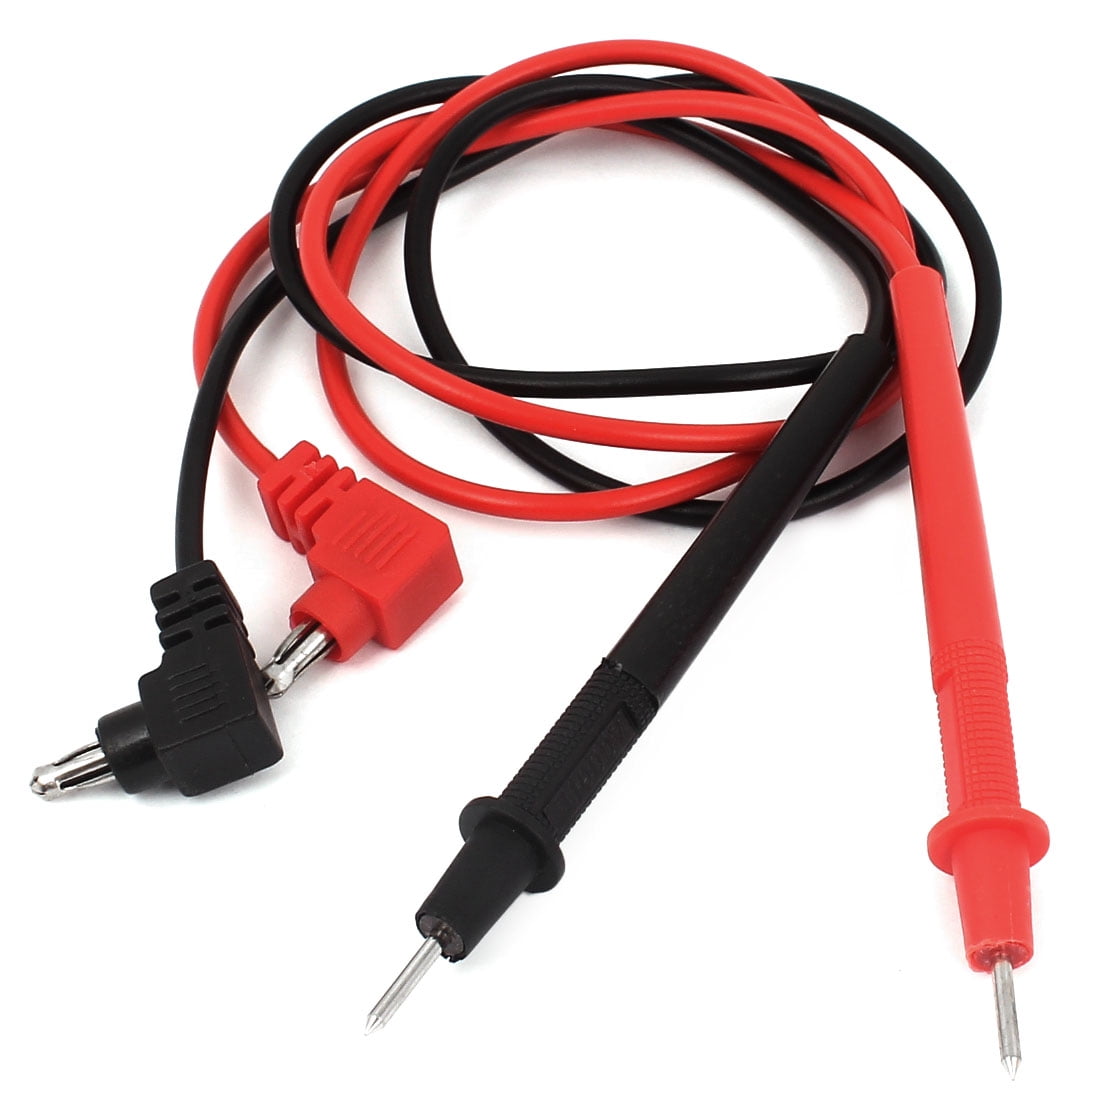 2Pack Multimeter test leads,Power Probe Piercing Probe Set,Auto repair test leads of 4mmm banana clip Red and Black Non-destructive Wire Piercing Probe